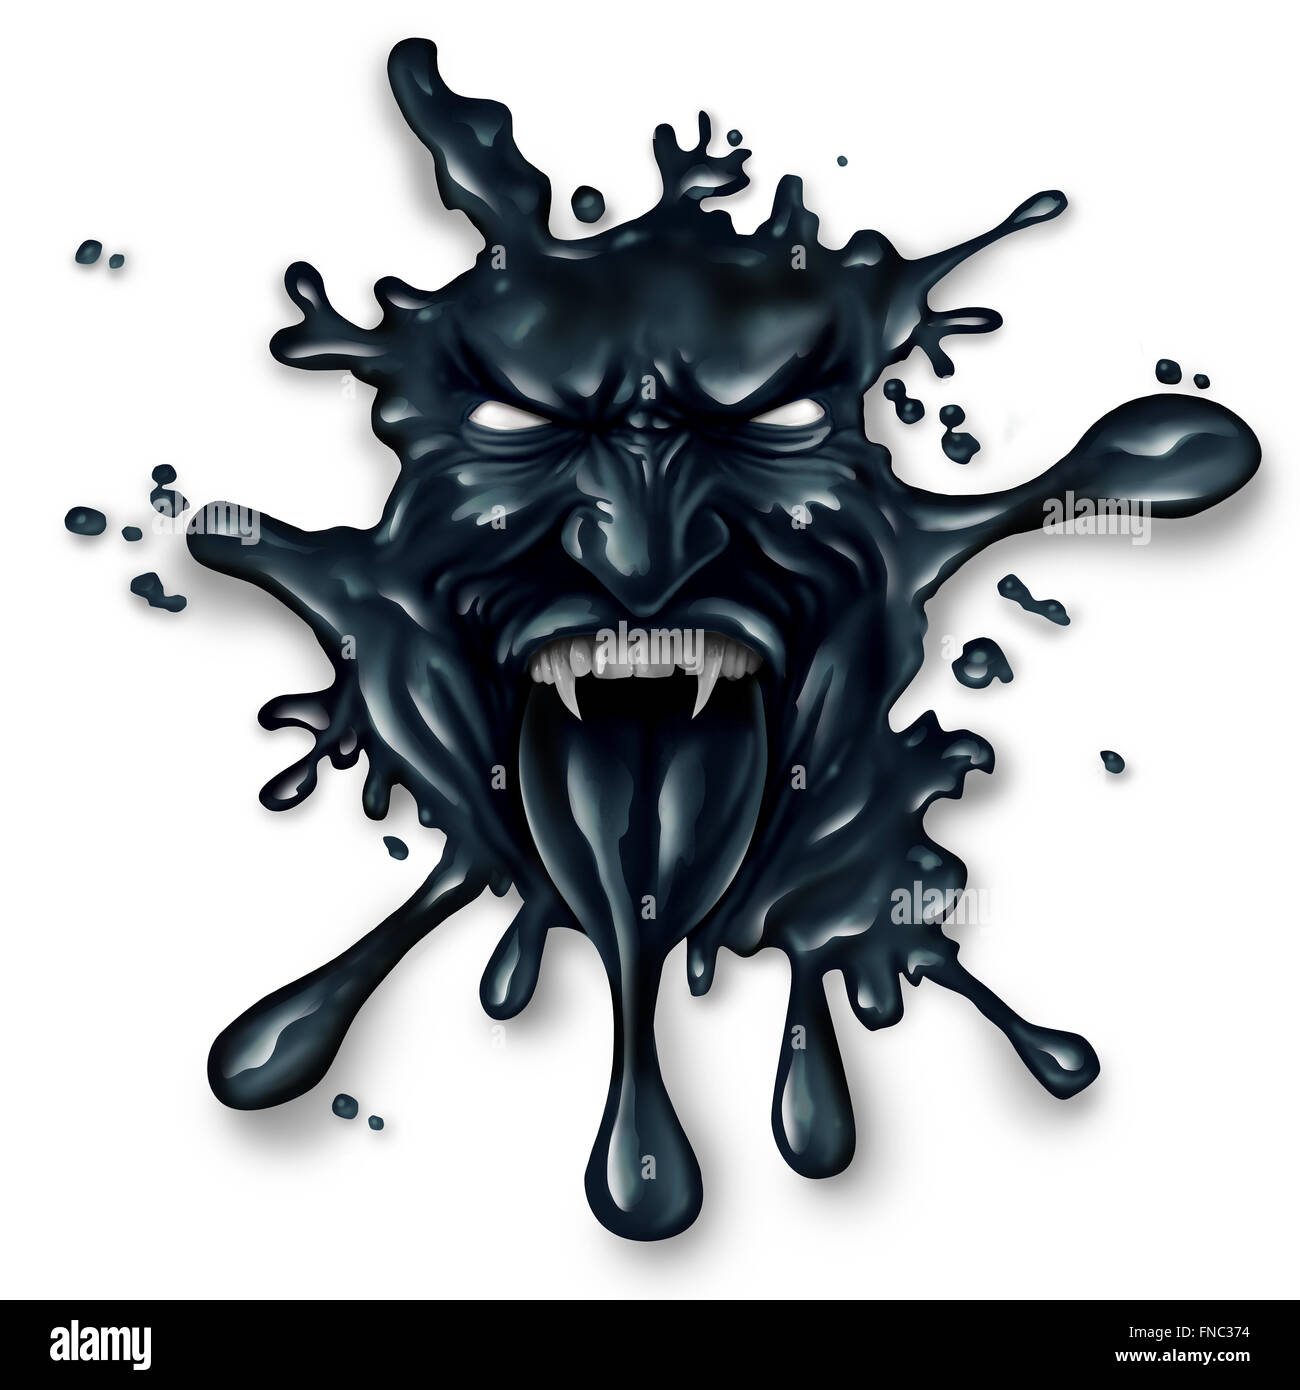 Scary oil spill splash as petroleum leaking with a monster face as a symbol for fossil fuel and crude energy fear concept on a white background. Stock Photo